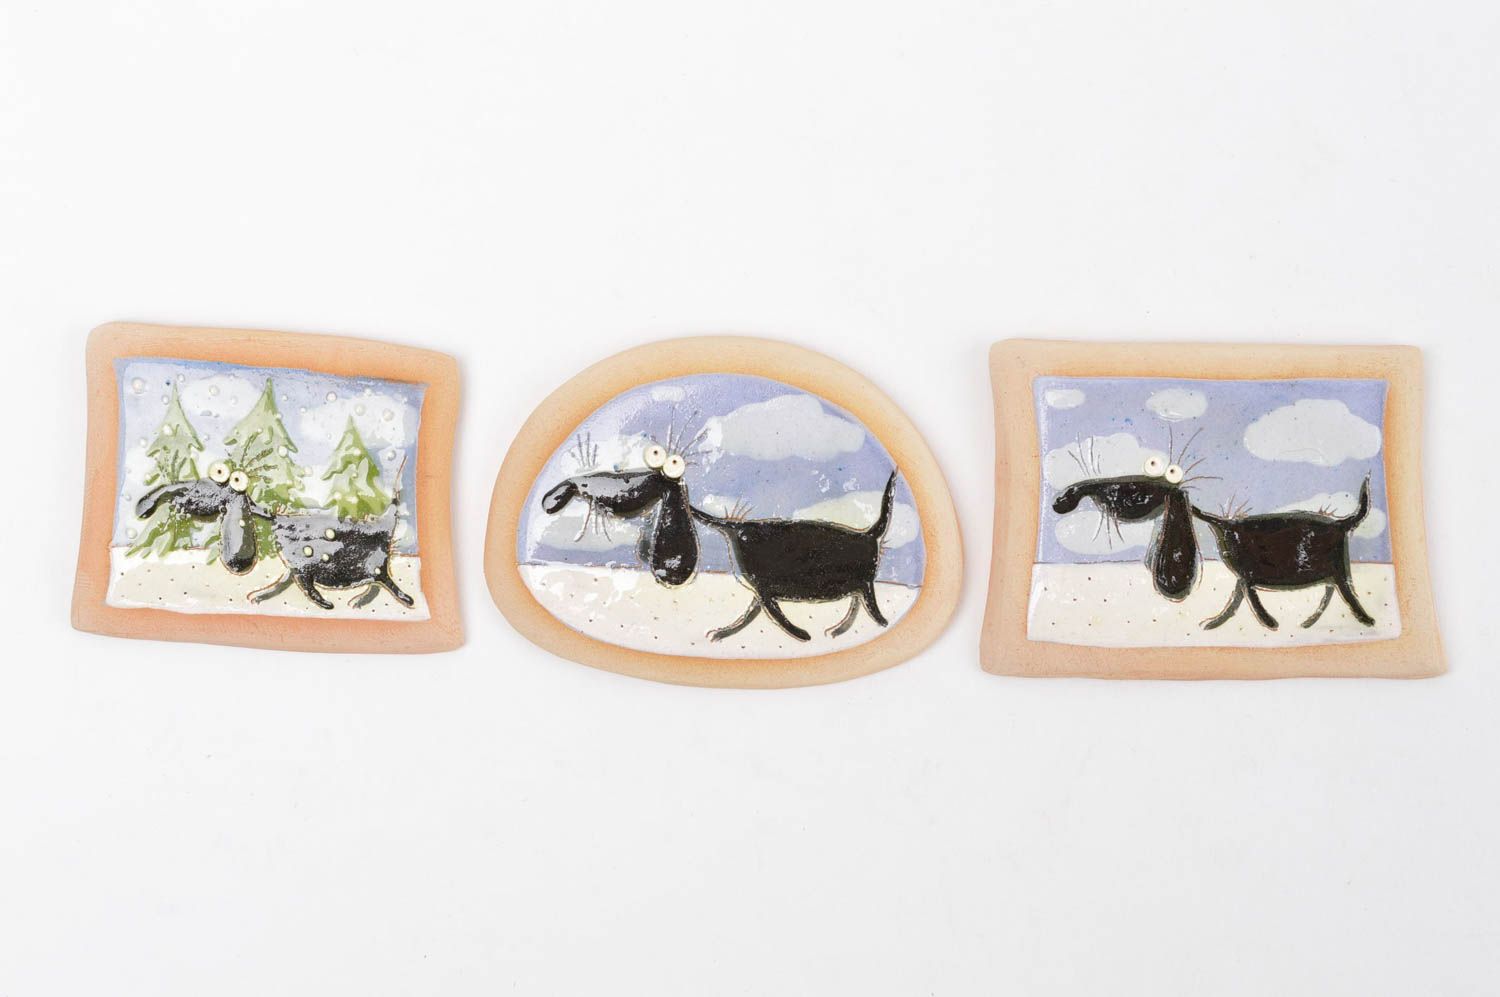 Handmade fridge magnet cool fridge magnets funny clay magnets 3 pieces photo 2